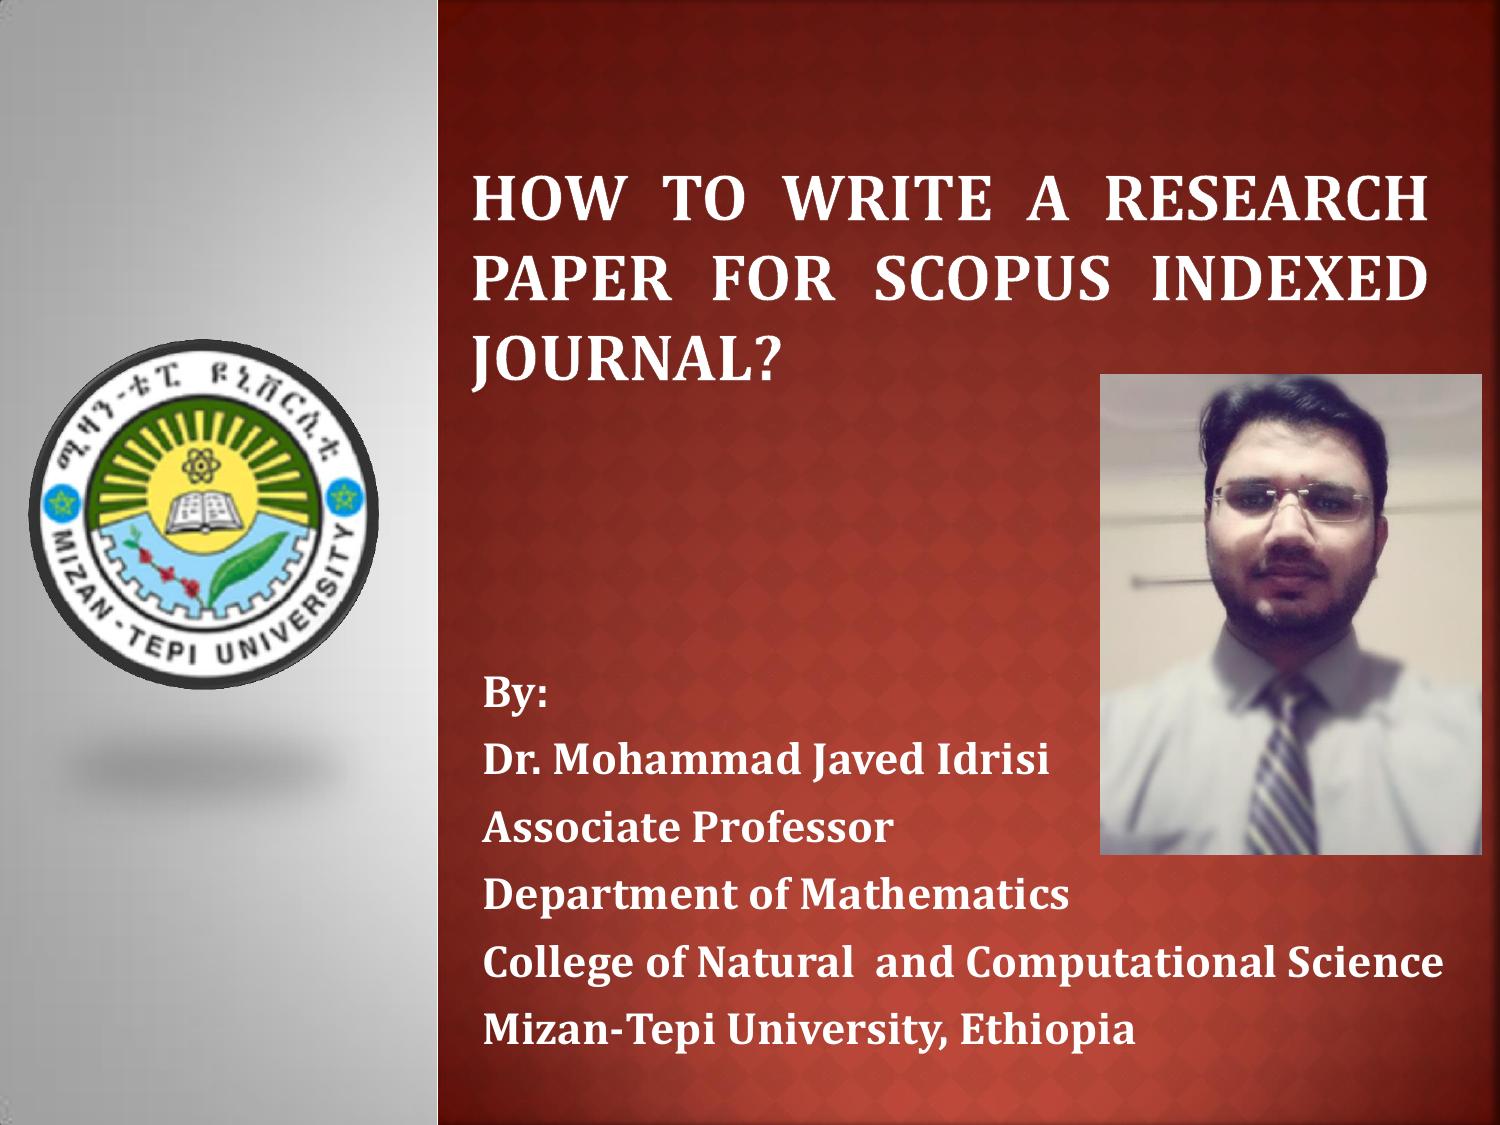 How to write a research paper for Scopus Indexed Journal?